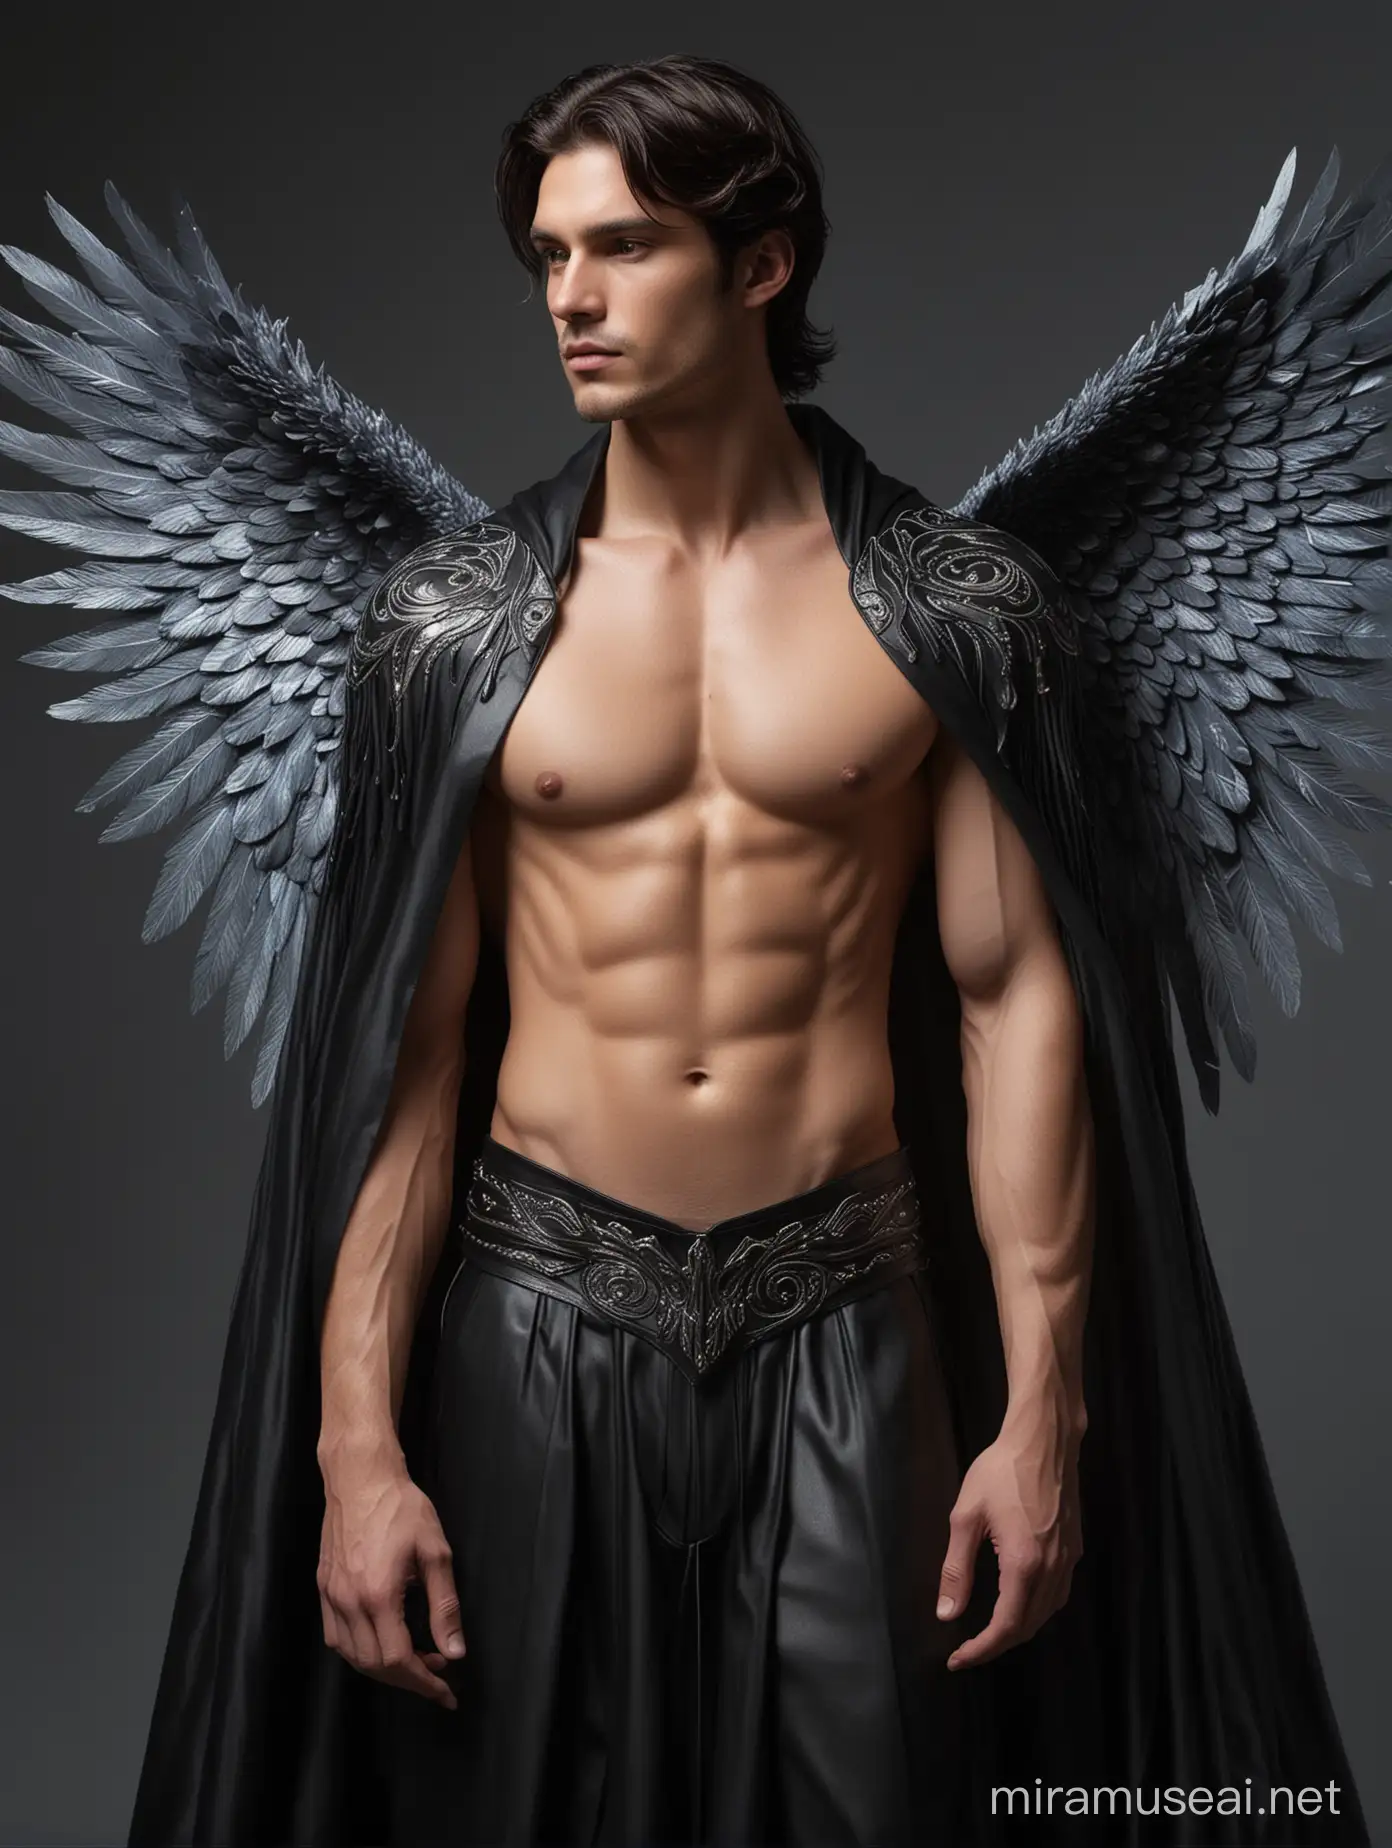 Male seraphim, four expansive wings reflecting an aurora and galactic theme, dark hair cascading beyond a stark jawline, bare chest exhibiting exquisite definition, loincloth ensemble, voluminous black leather cape captured mid-billow revealing intricate embroidery, fabric clasping, full-length stance, volumetric lighting accentuating muscle contour through shadow play and softened transitions, nose prominent with a slight upturn, enticing glare, celestial wings displaying spectrum hues, ultra-realistic, masculine yet ethereal